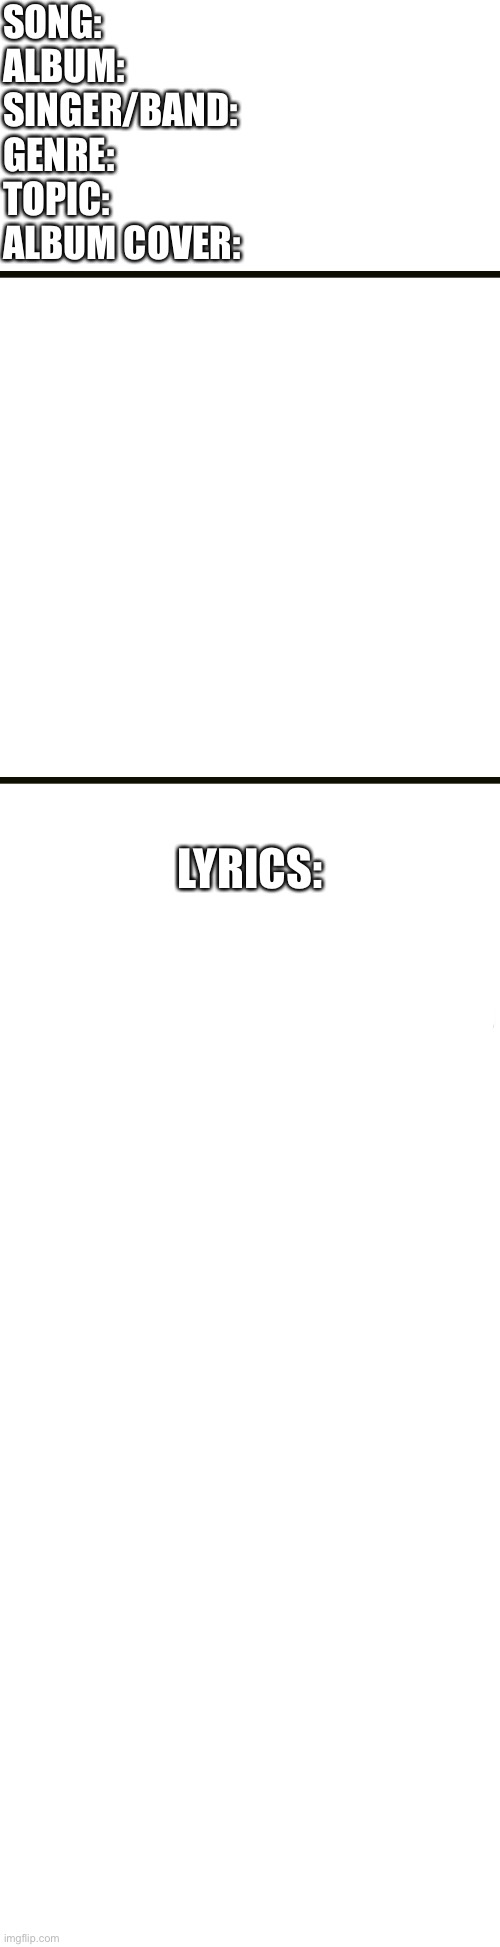 High Quality Song profile Blank Meme Template